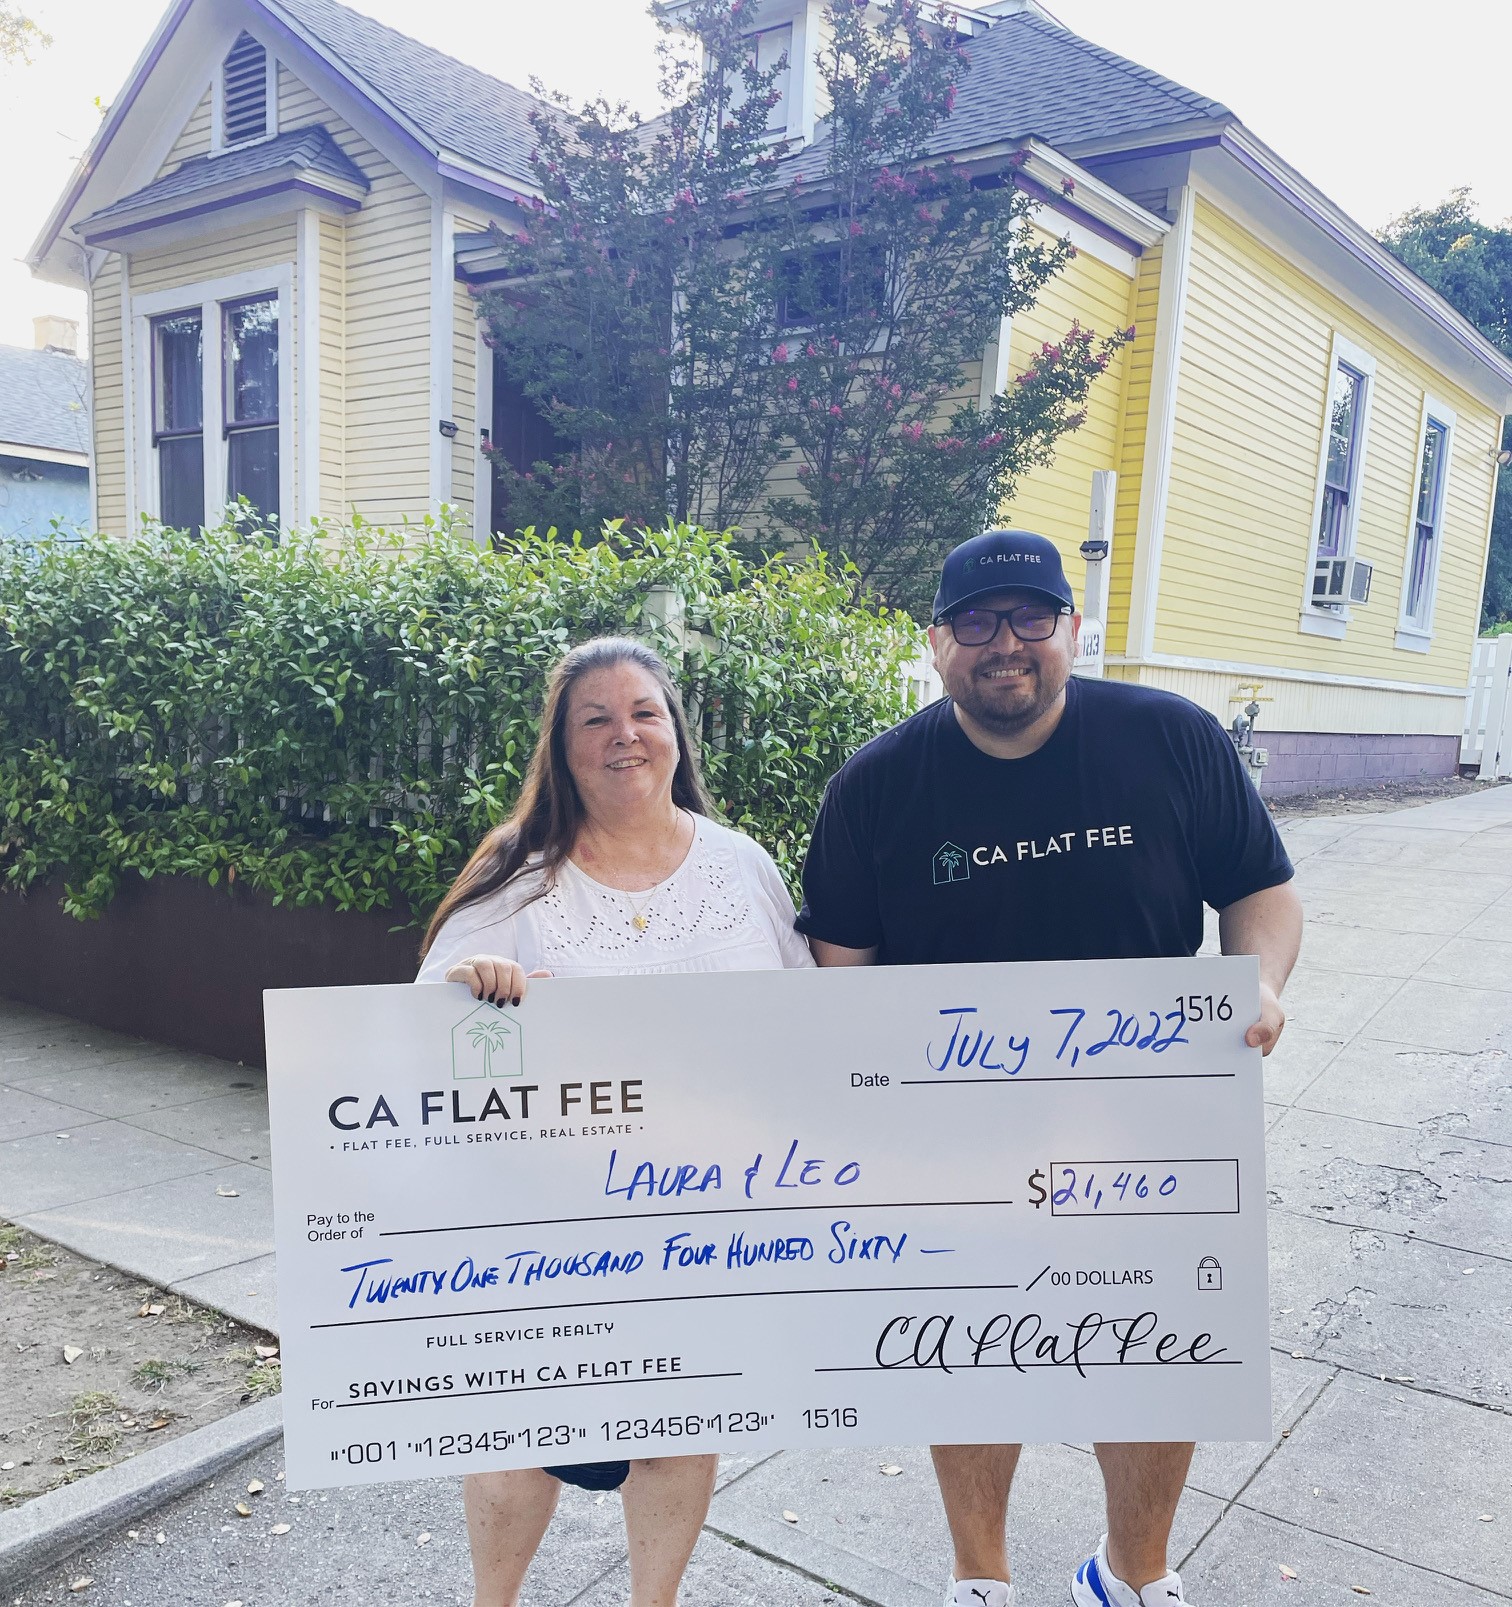 CA Flat Fee image of a man and woman holding an oversized check in front of a yellow house